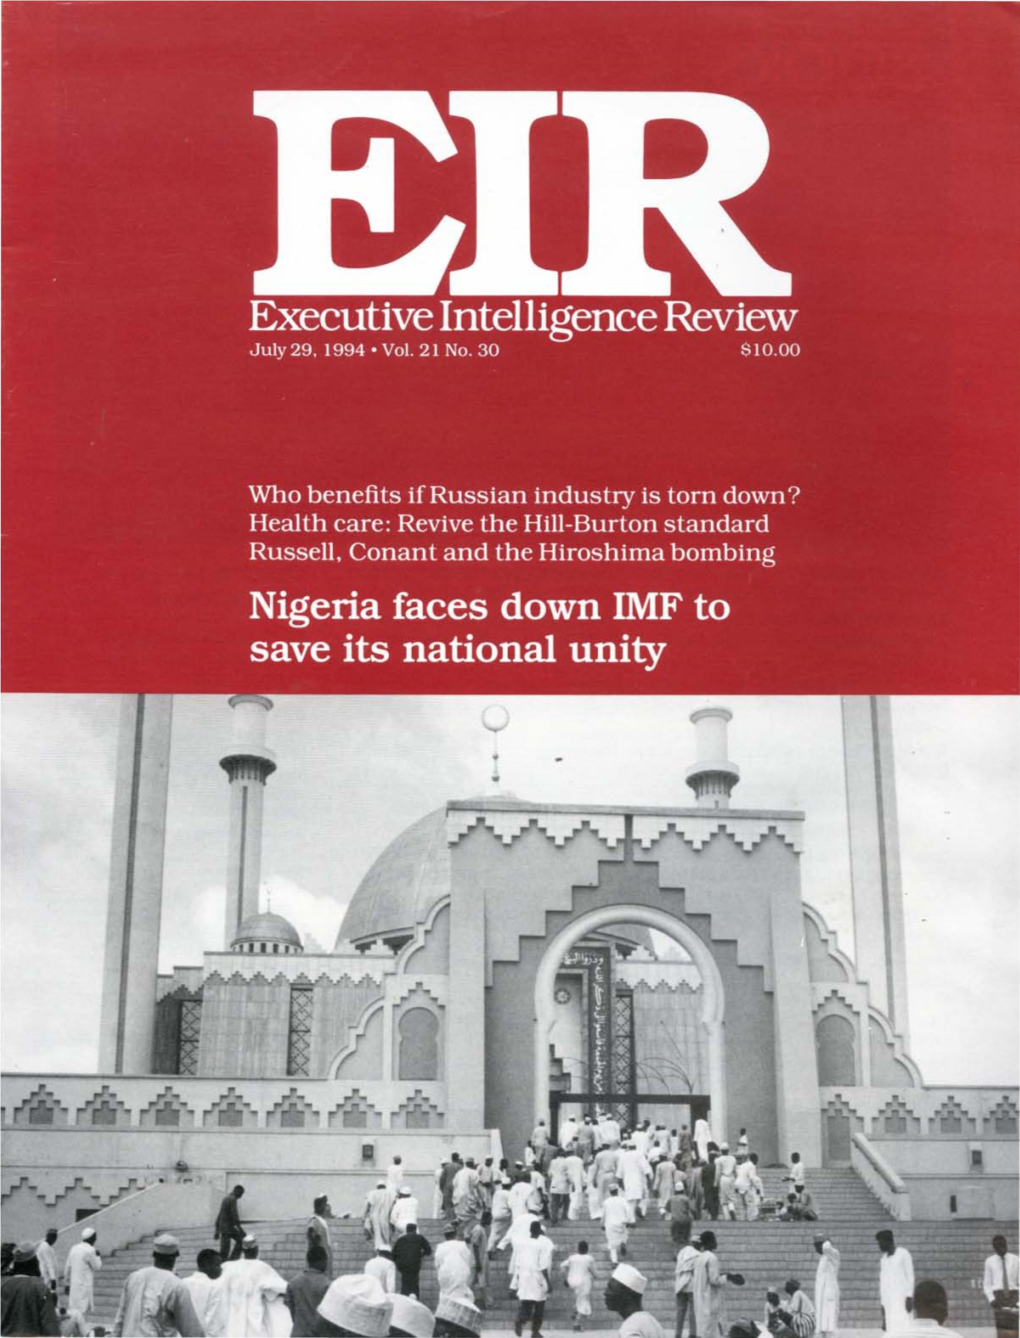 Executive Intelligence Review, Volume 21, Number 30, July 29, 1994